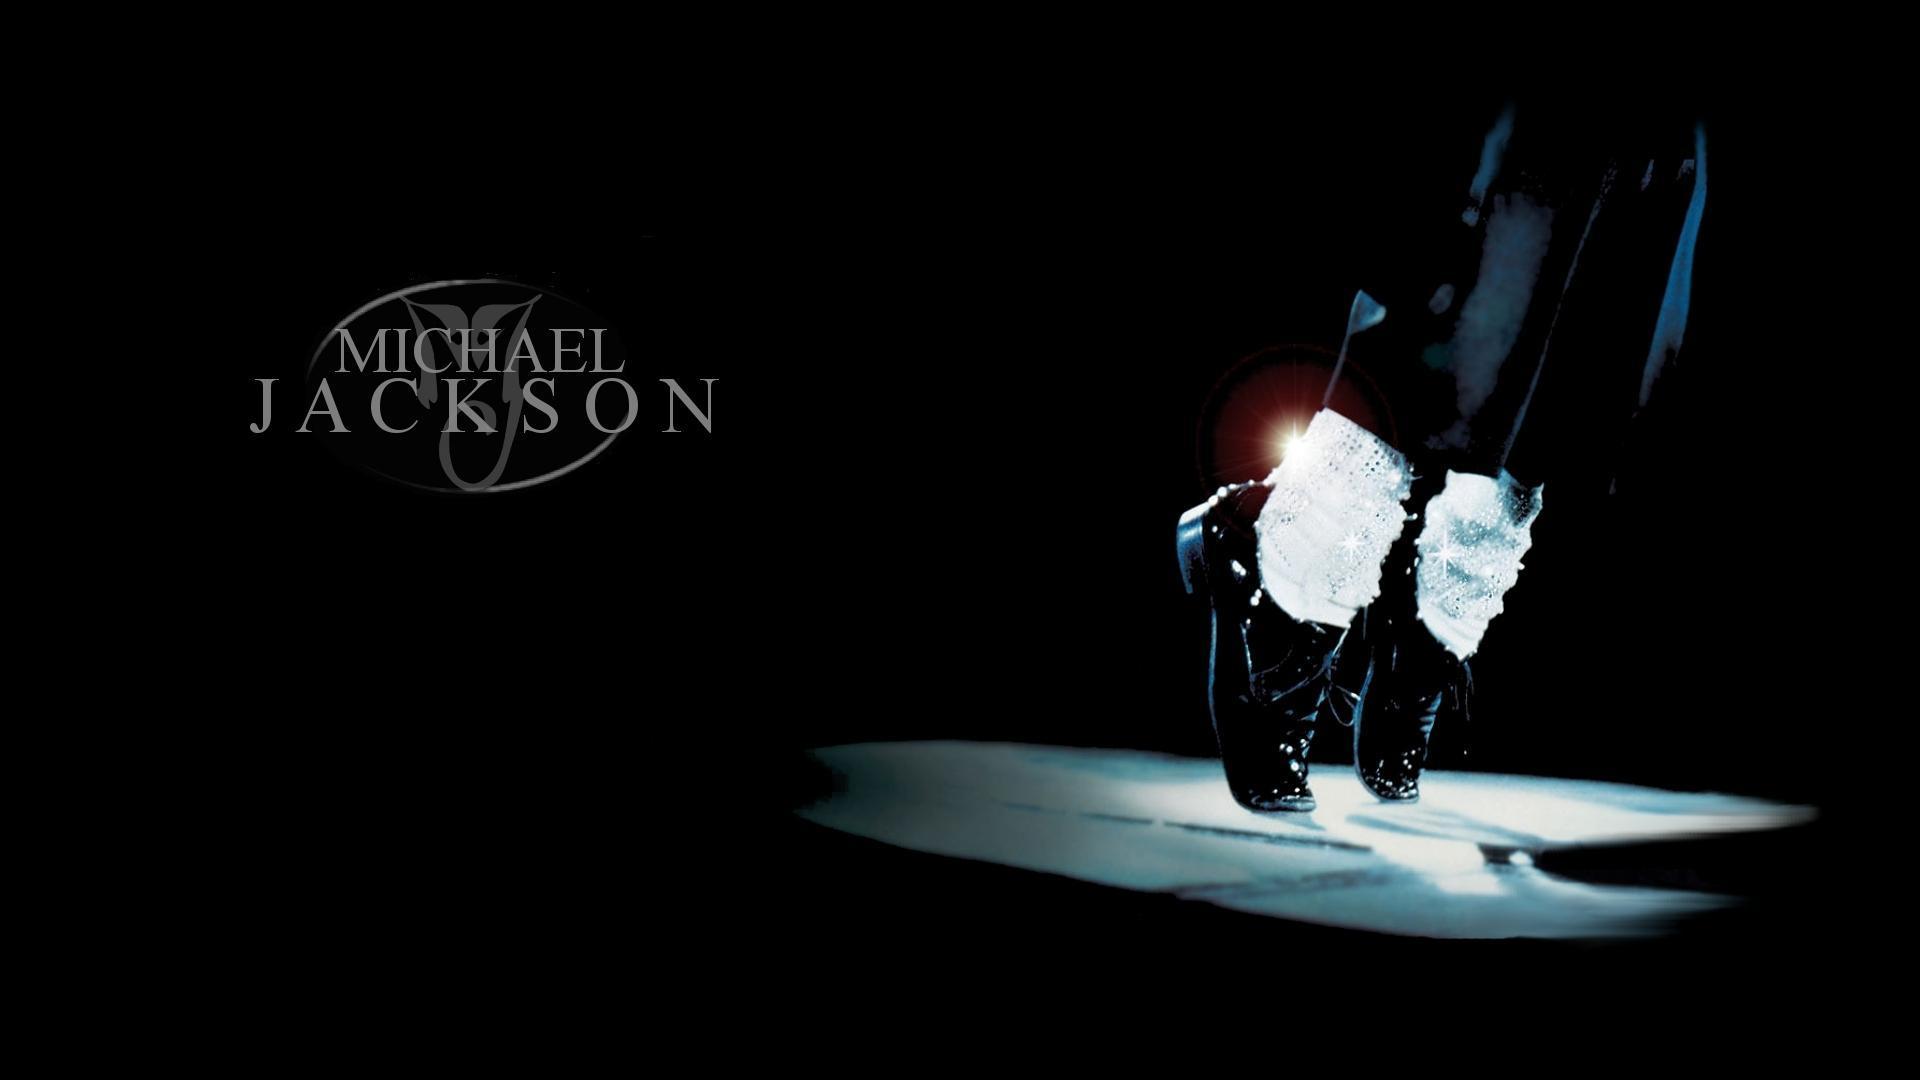 Michael Jackson Image Mj HD Wallpaper And Background